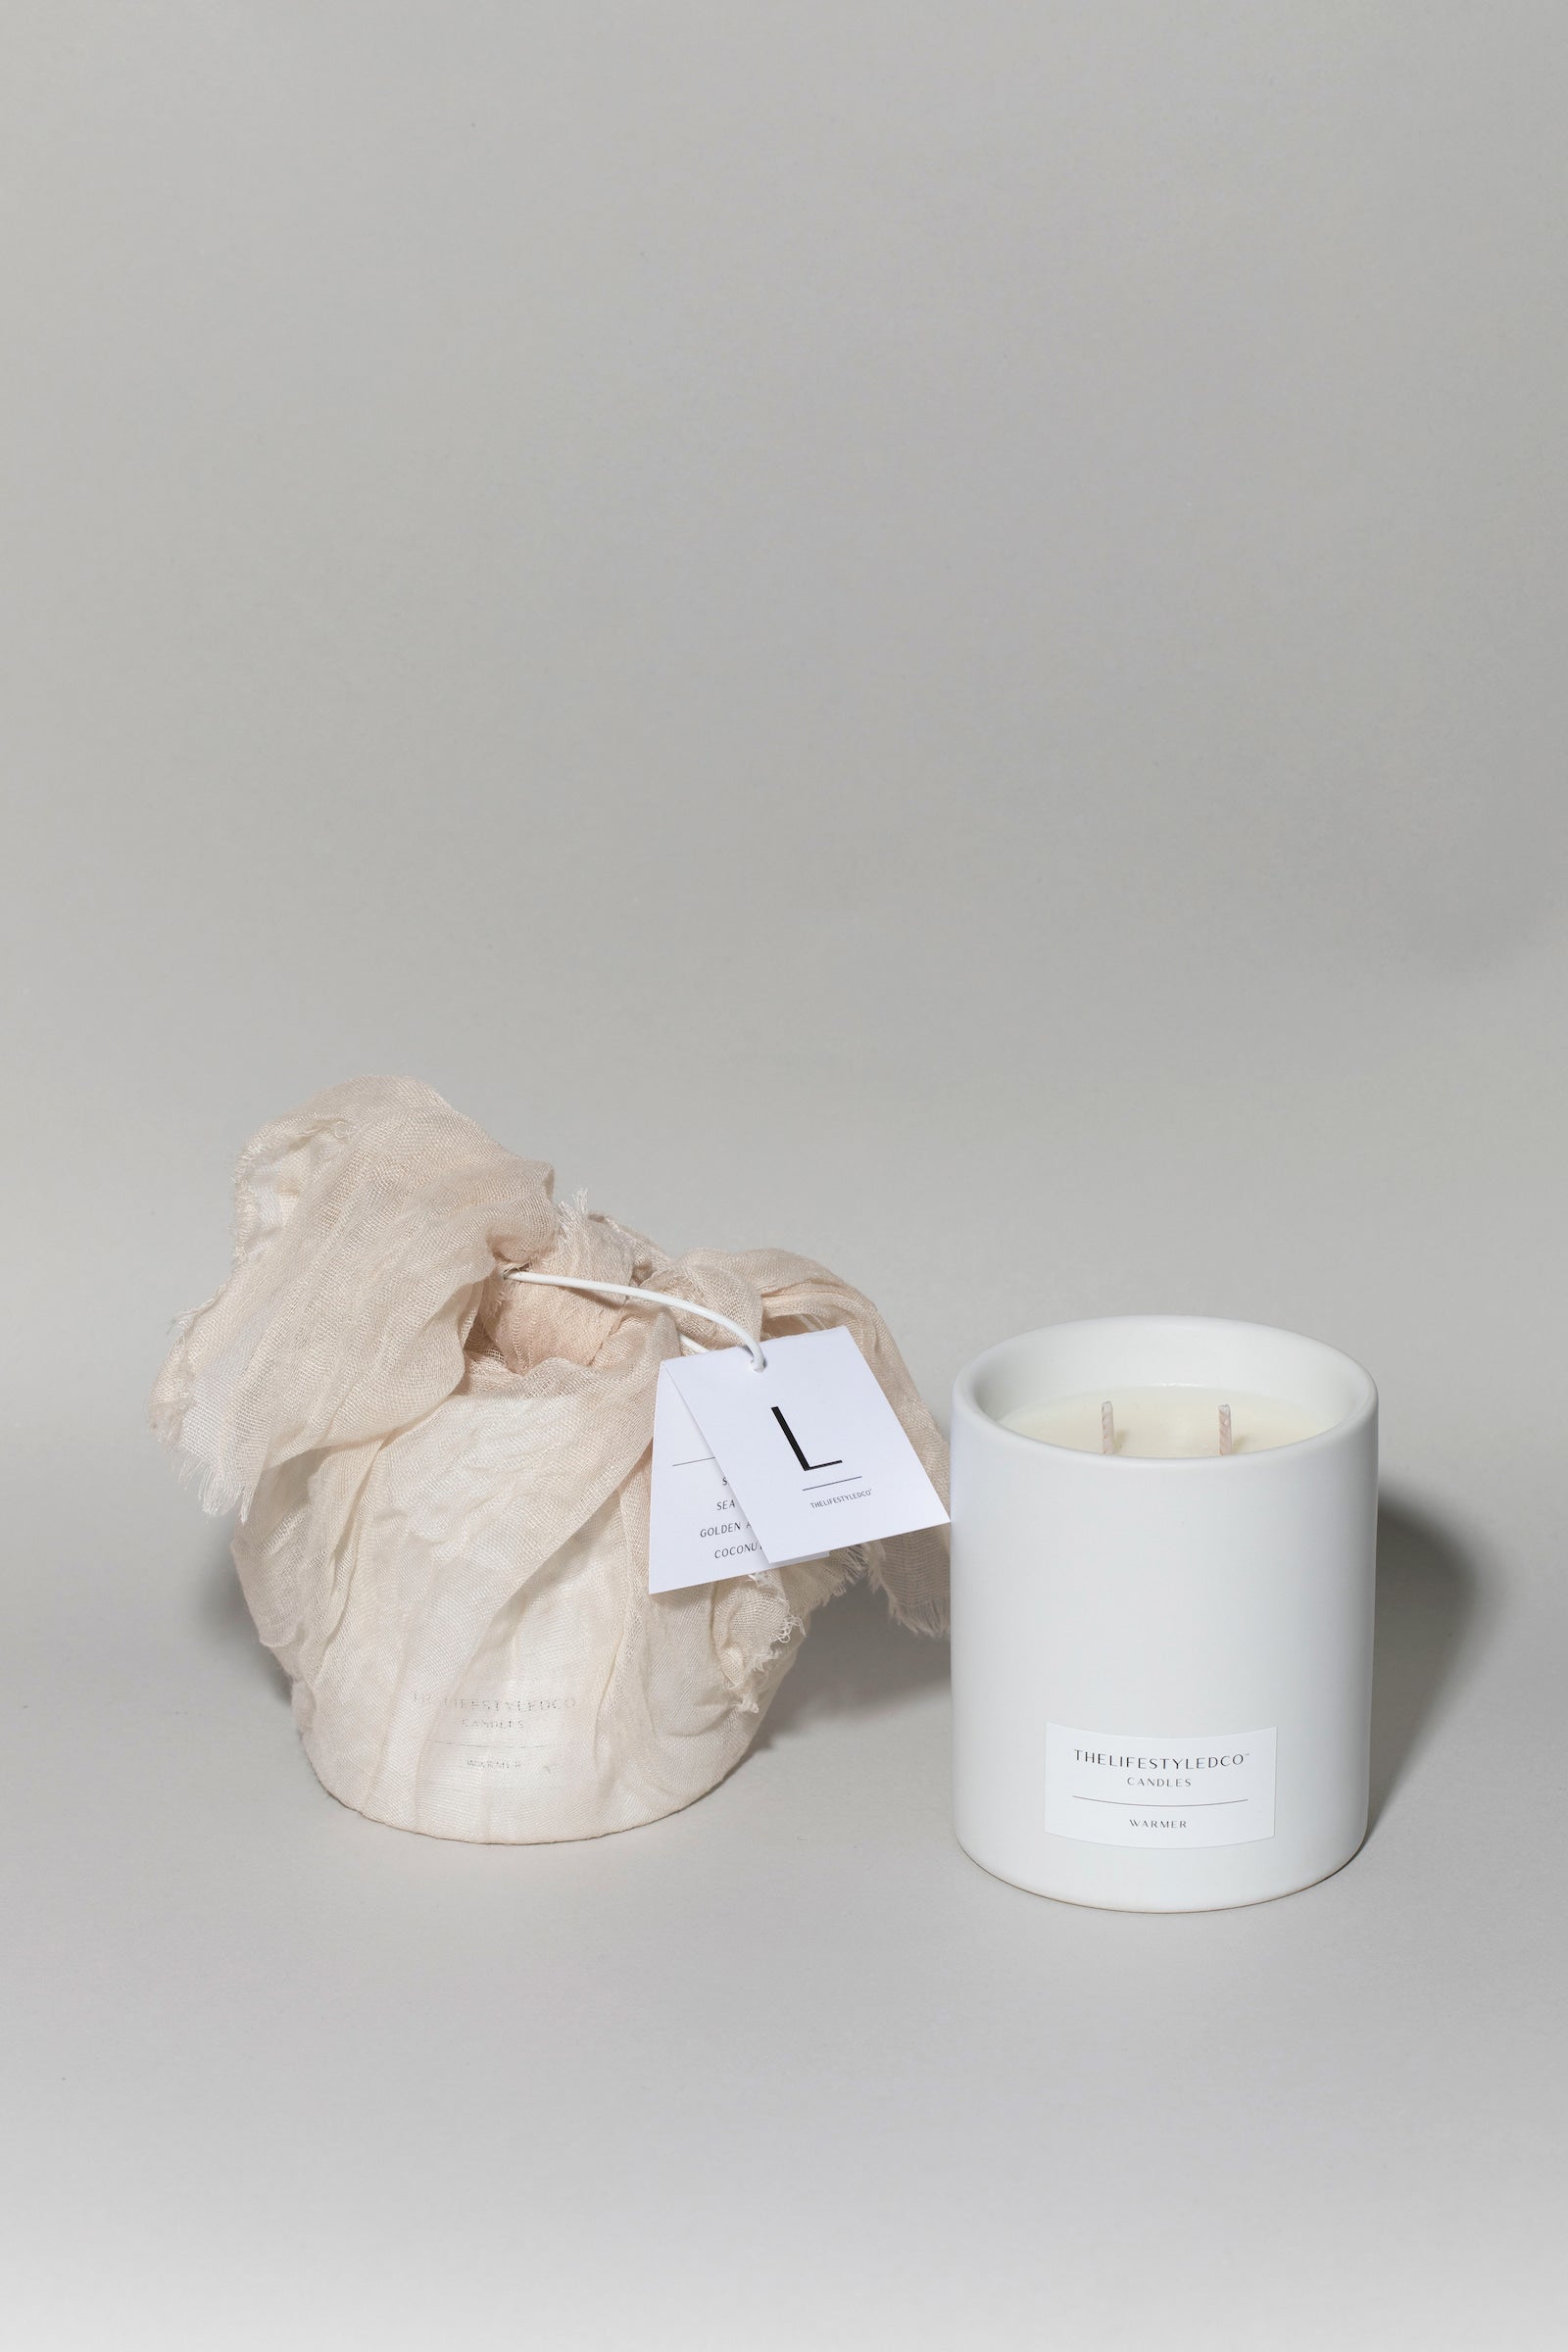 LCO EXCLUSIVE - Warmer Vol. 02 Double Wick Candle - 13 oz